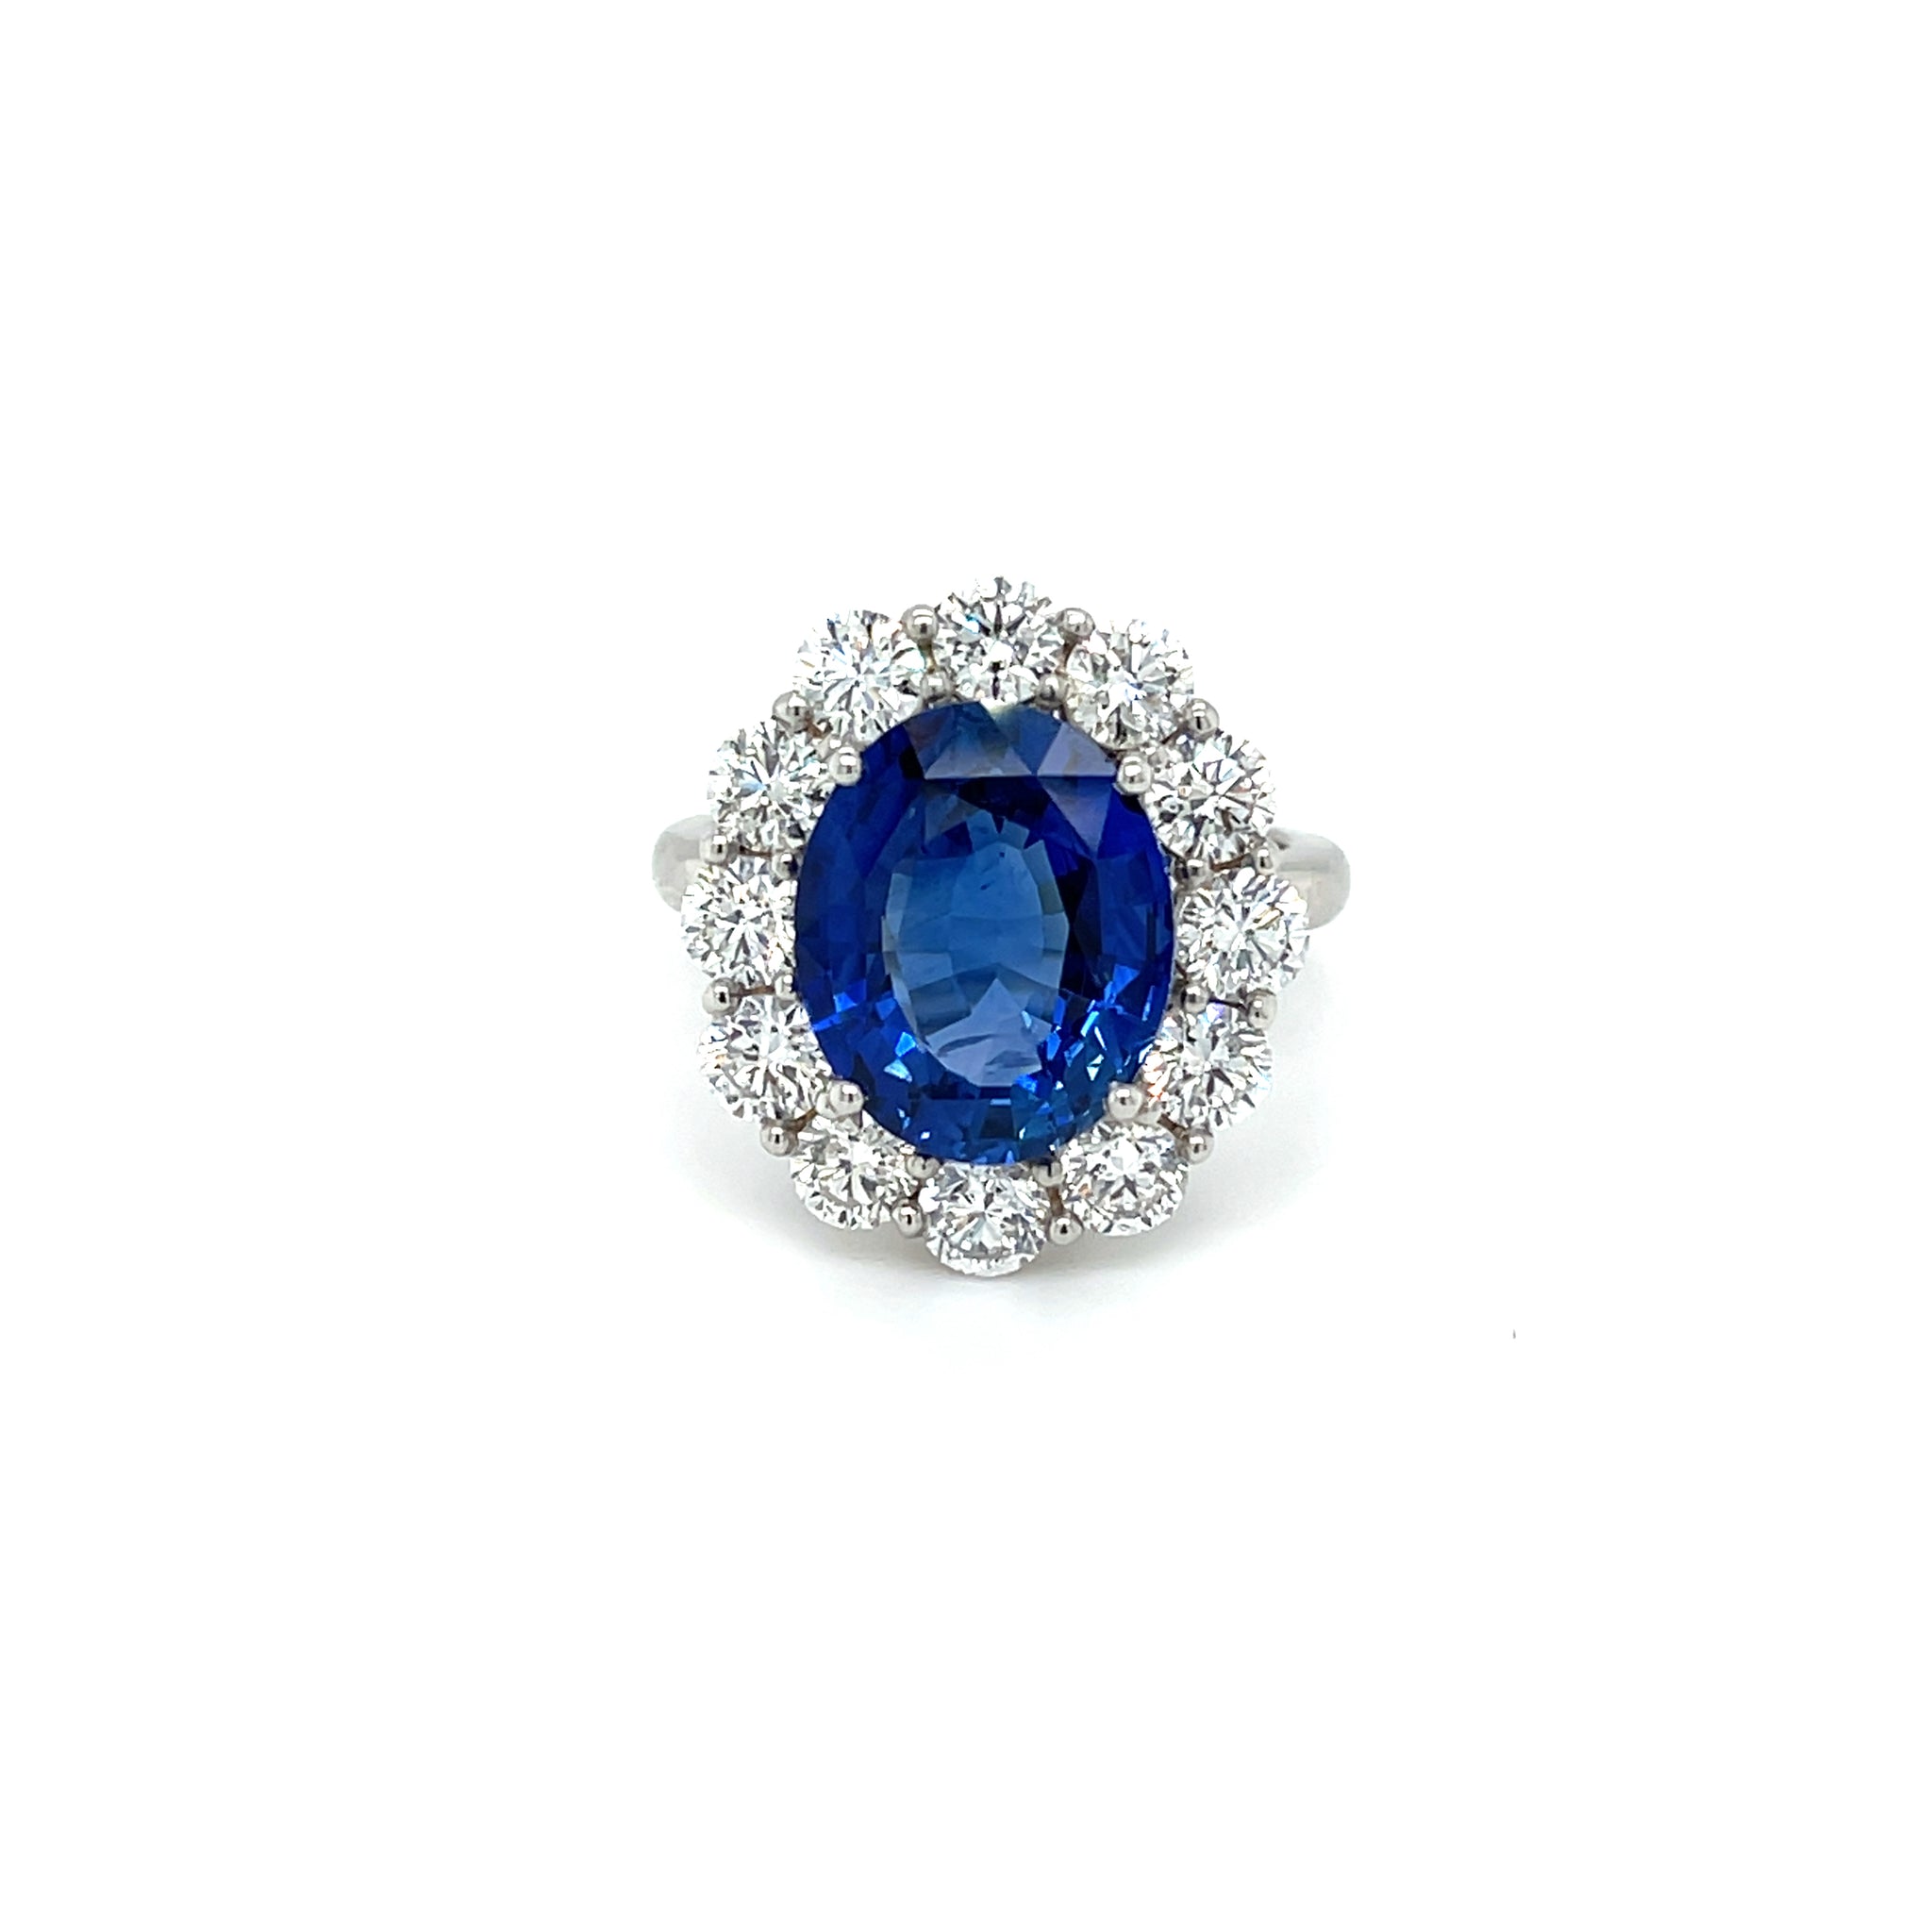 The fishing net ring with a blue sapphire- size 7 ready to ship – Sandrine  B.